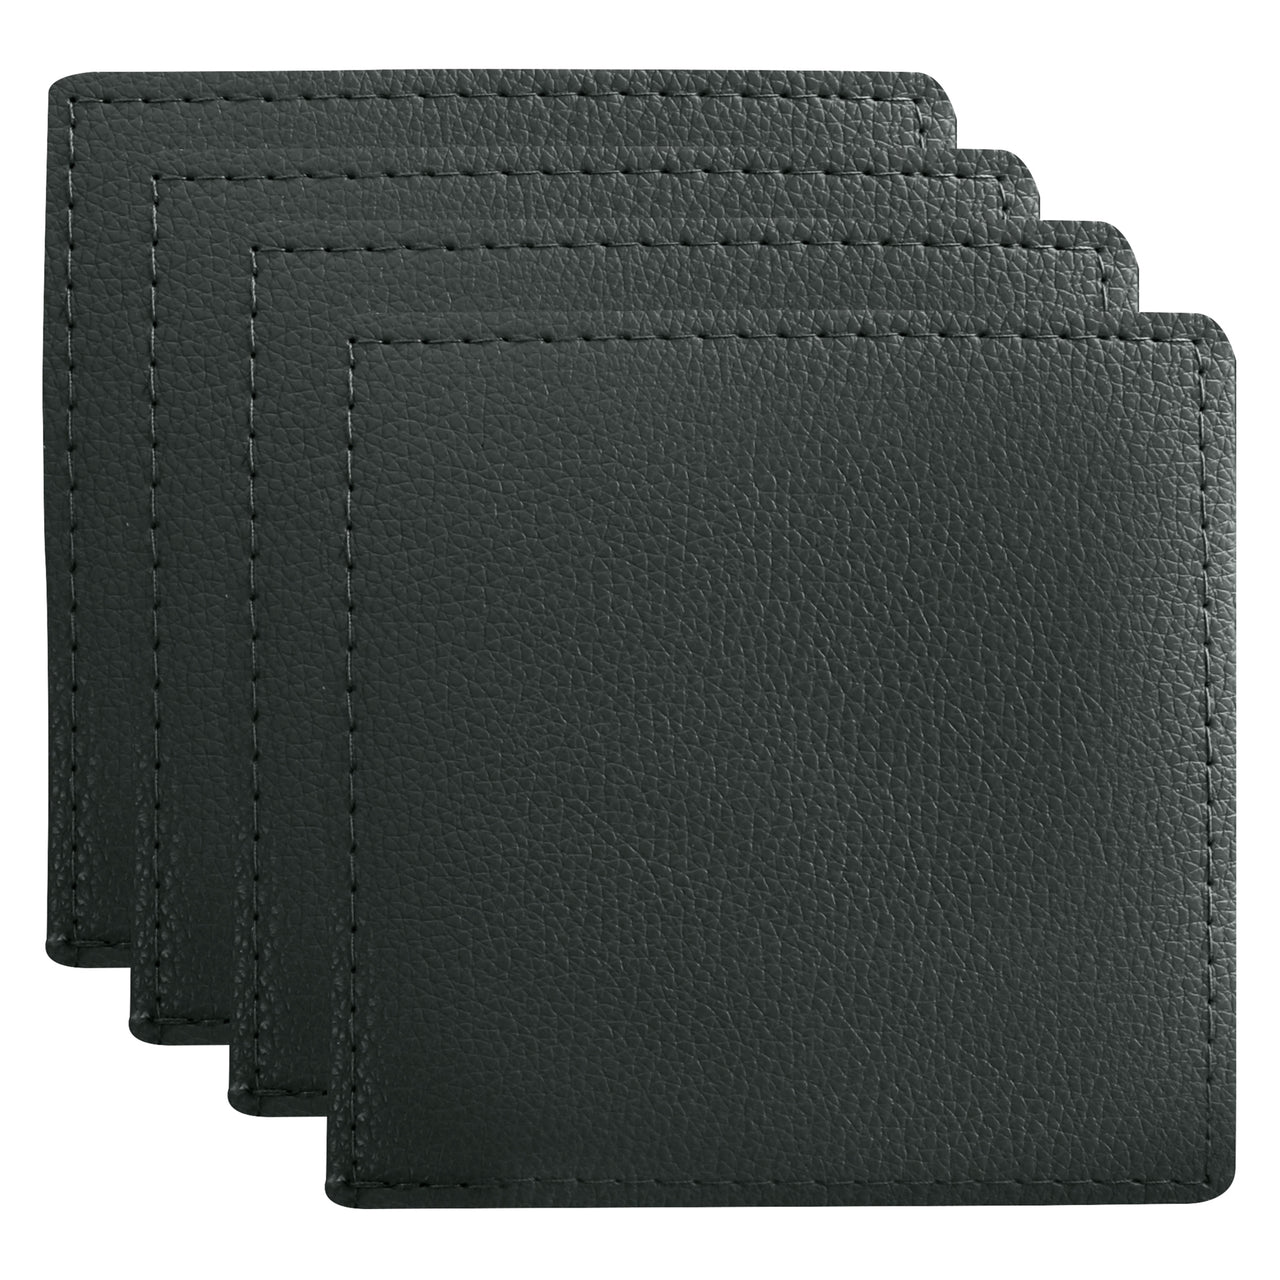 Charcoal Table Accents Faux Cowhide Leather Coasters (Set of 4)